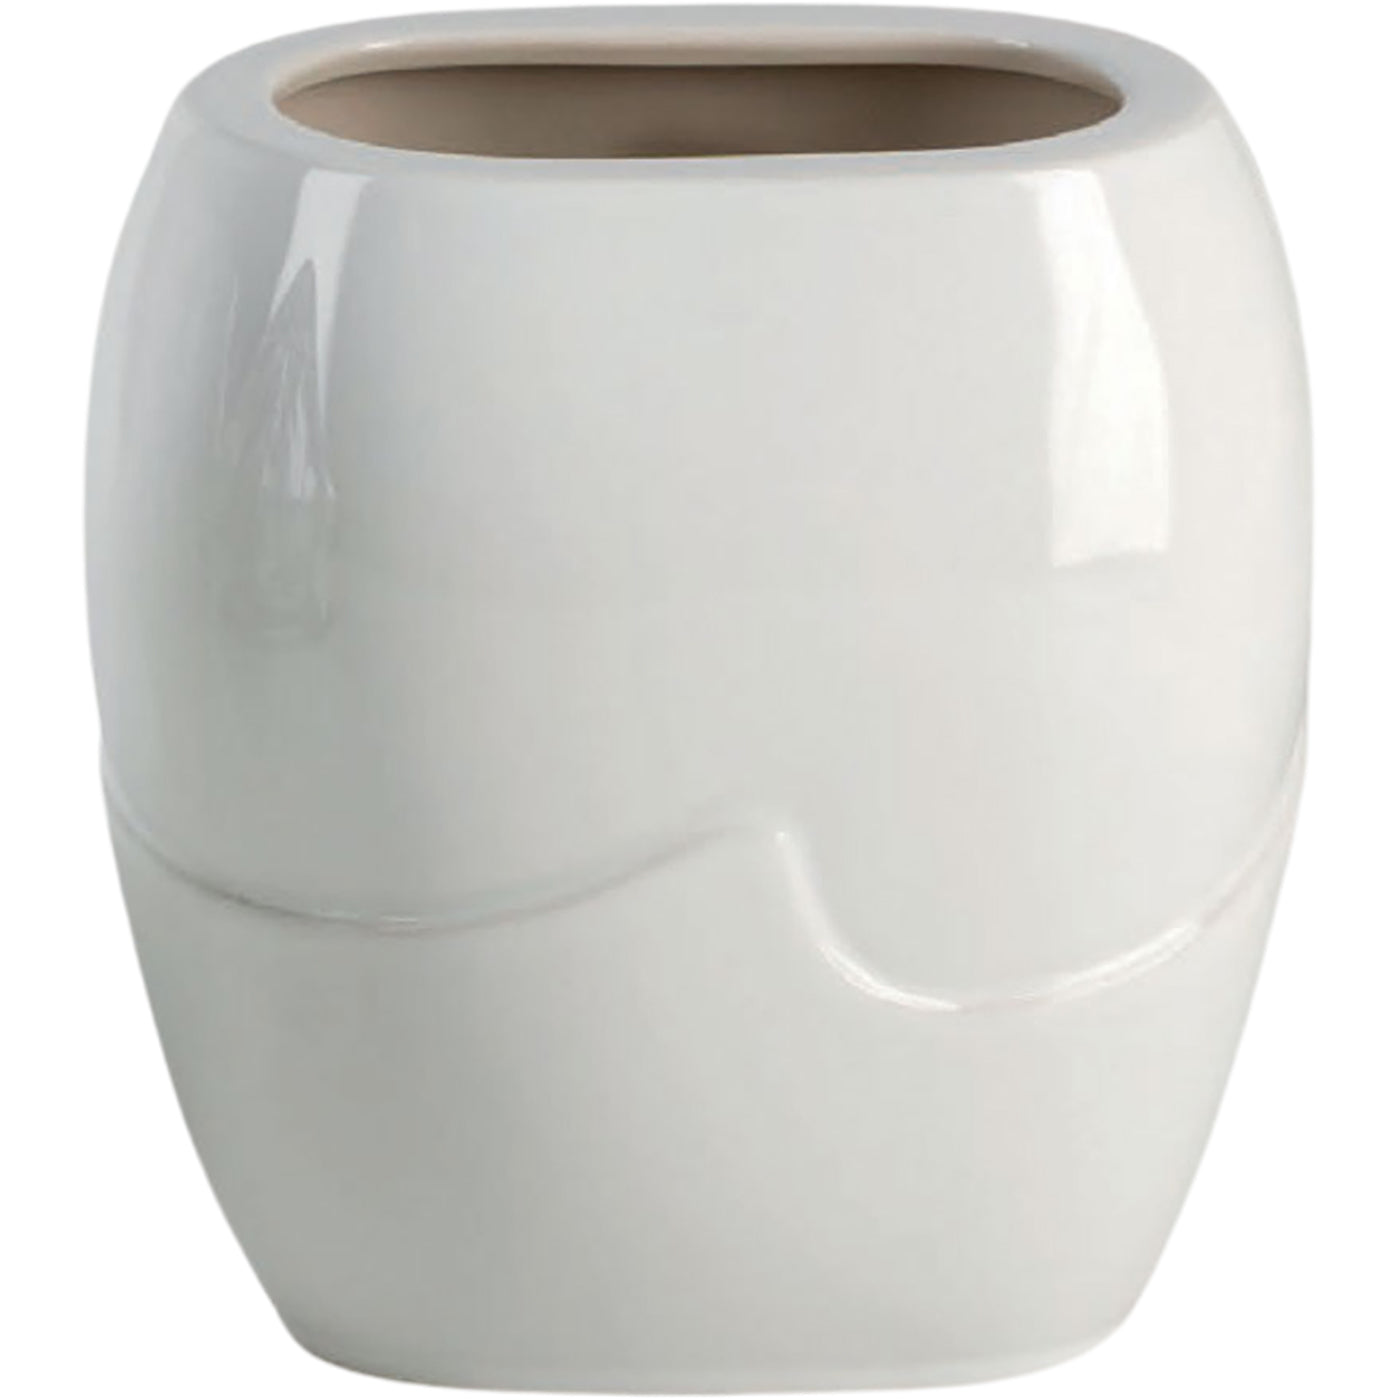 Rectangular grave vase Onda 19x17cm - 7.5x6.7in In white porcelain, wall attached ON166P